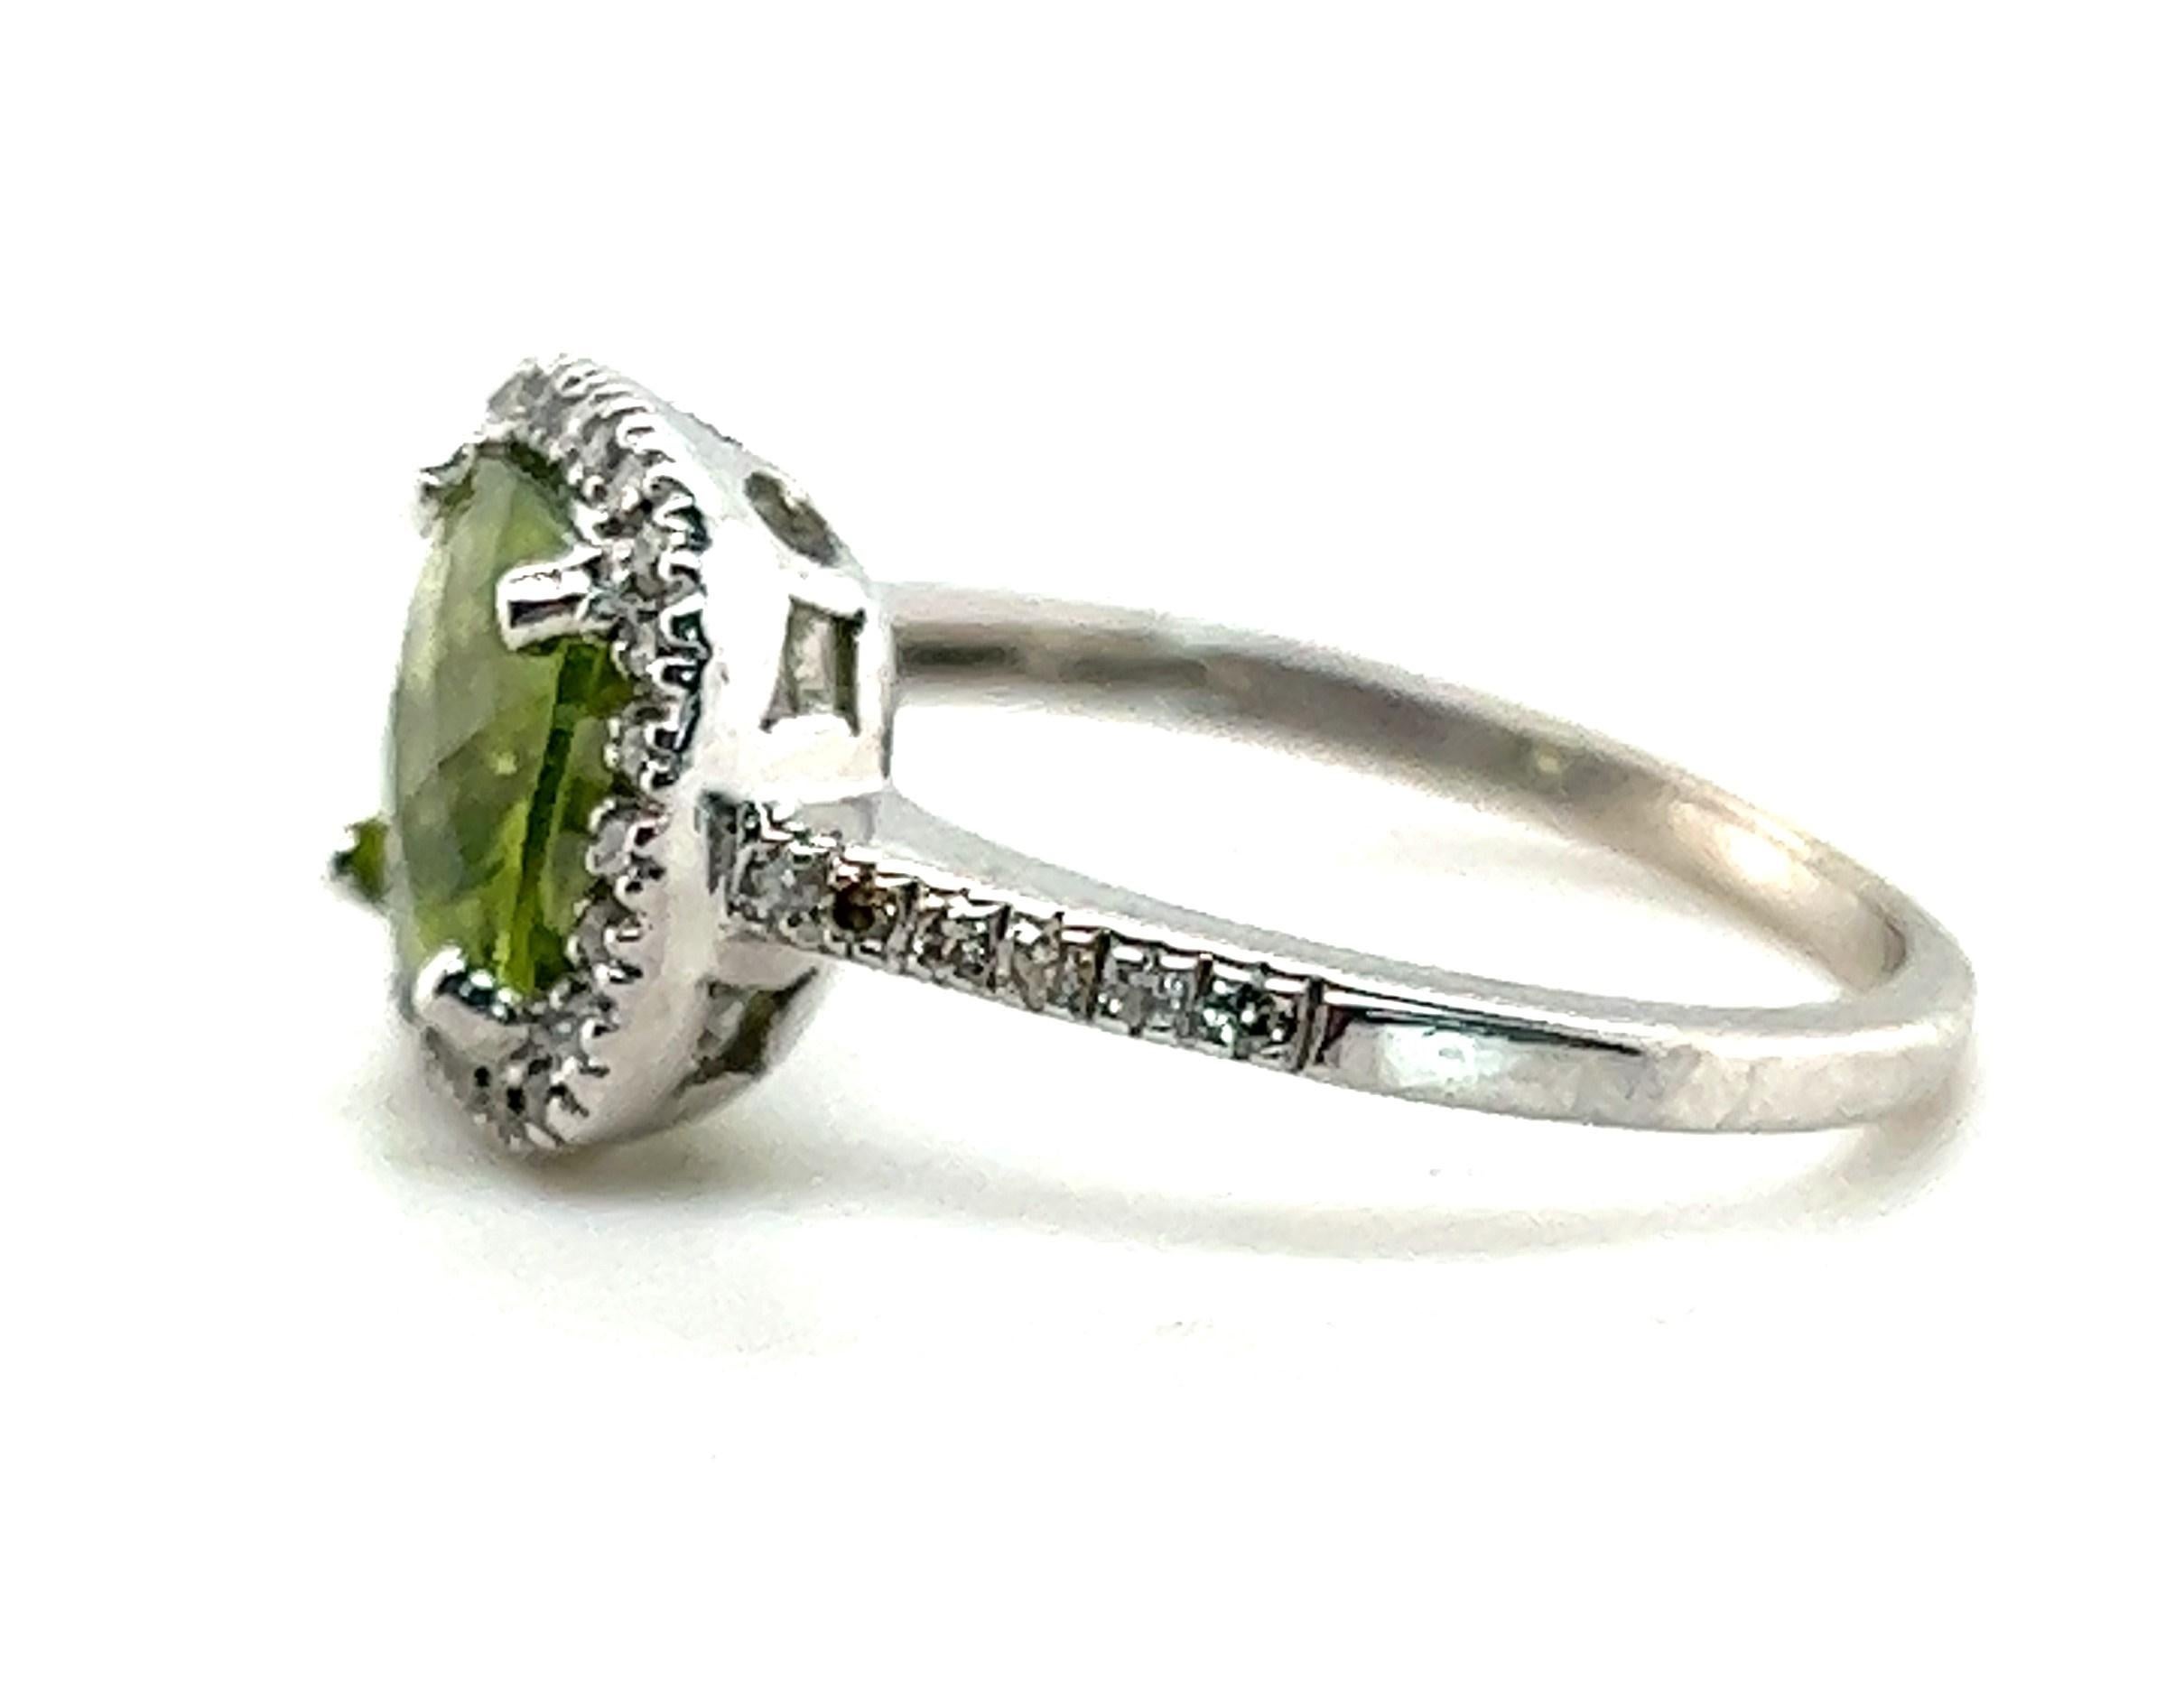 What do you get the August baby with everything? This gorgeous peridot ring, of course!

This ring contains one center antique cushion cut peridot weighing approximately 1.59 carats. Surrounding the peridot is a halo of diamonds weighing